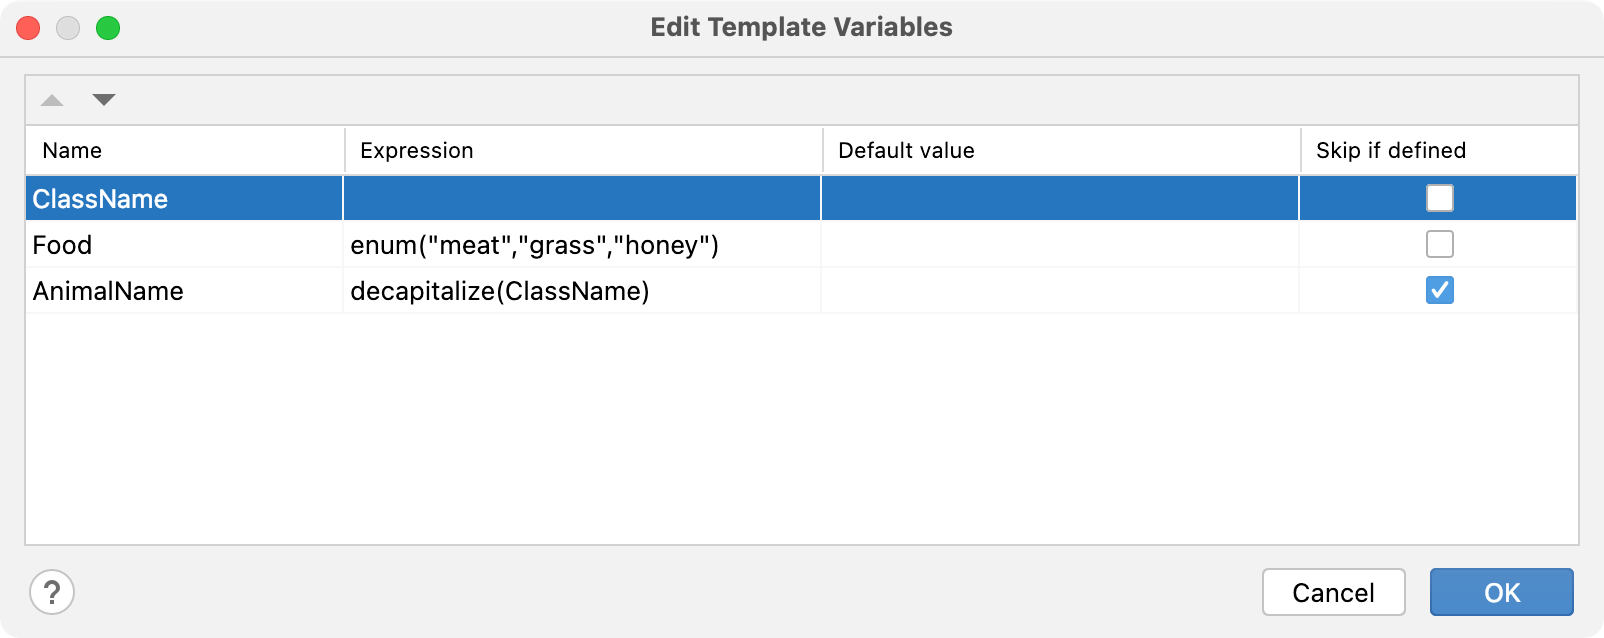 Edit Template Variables